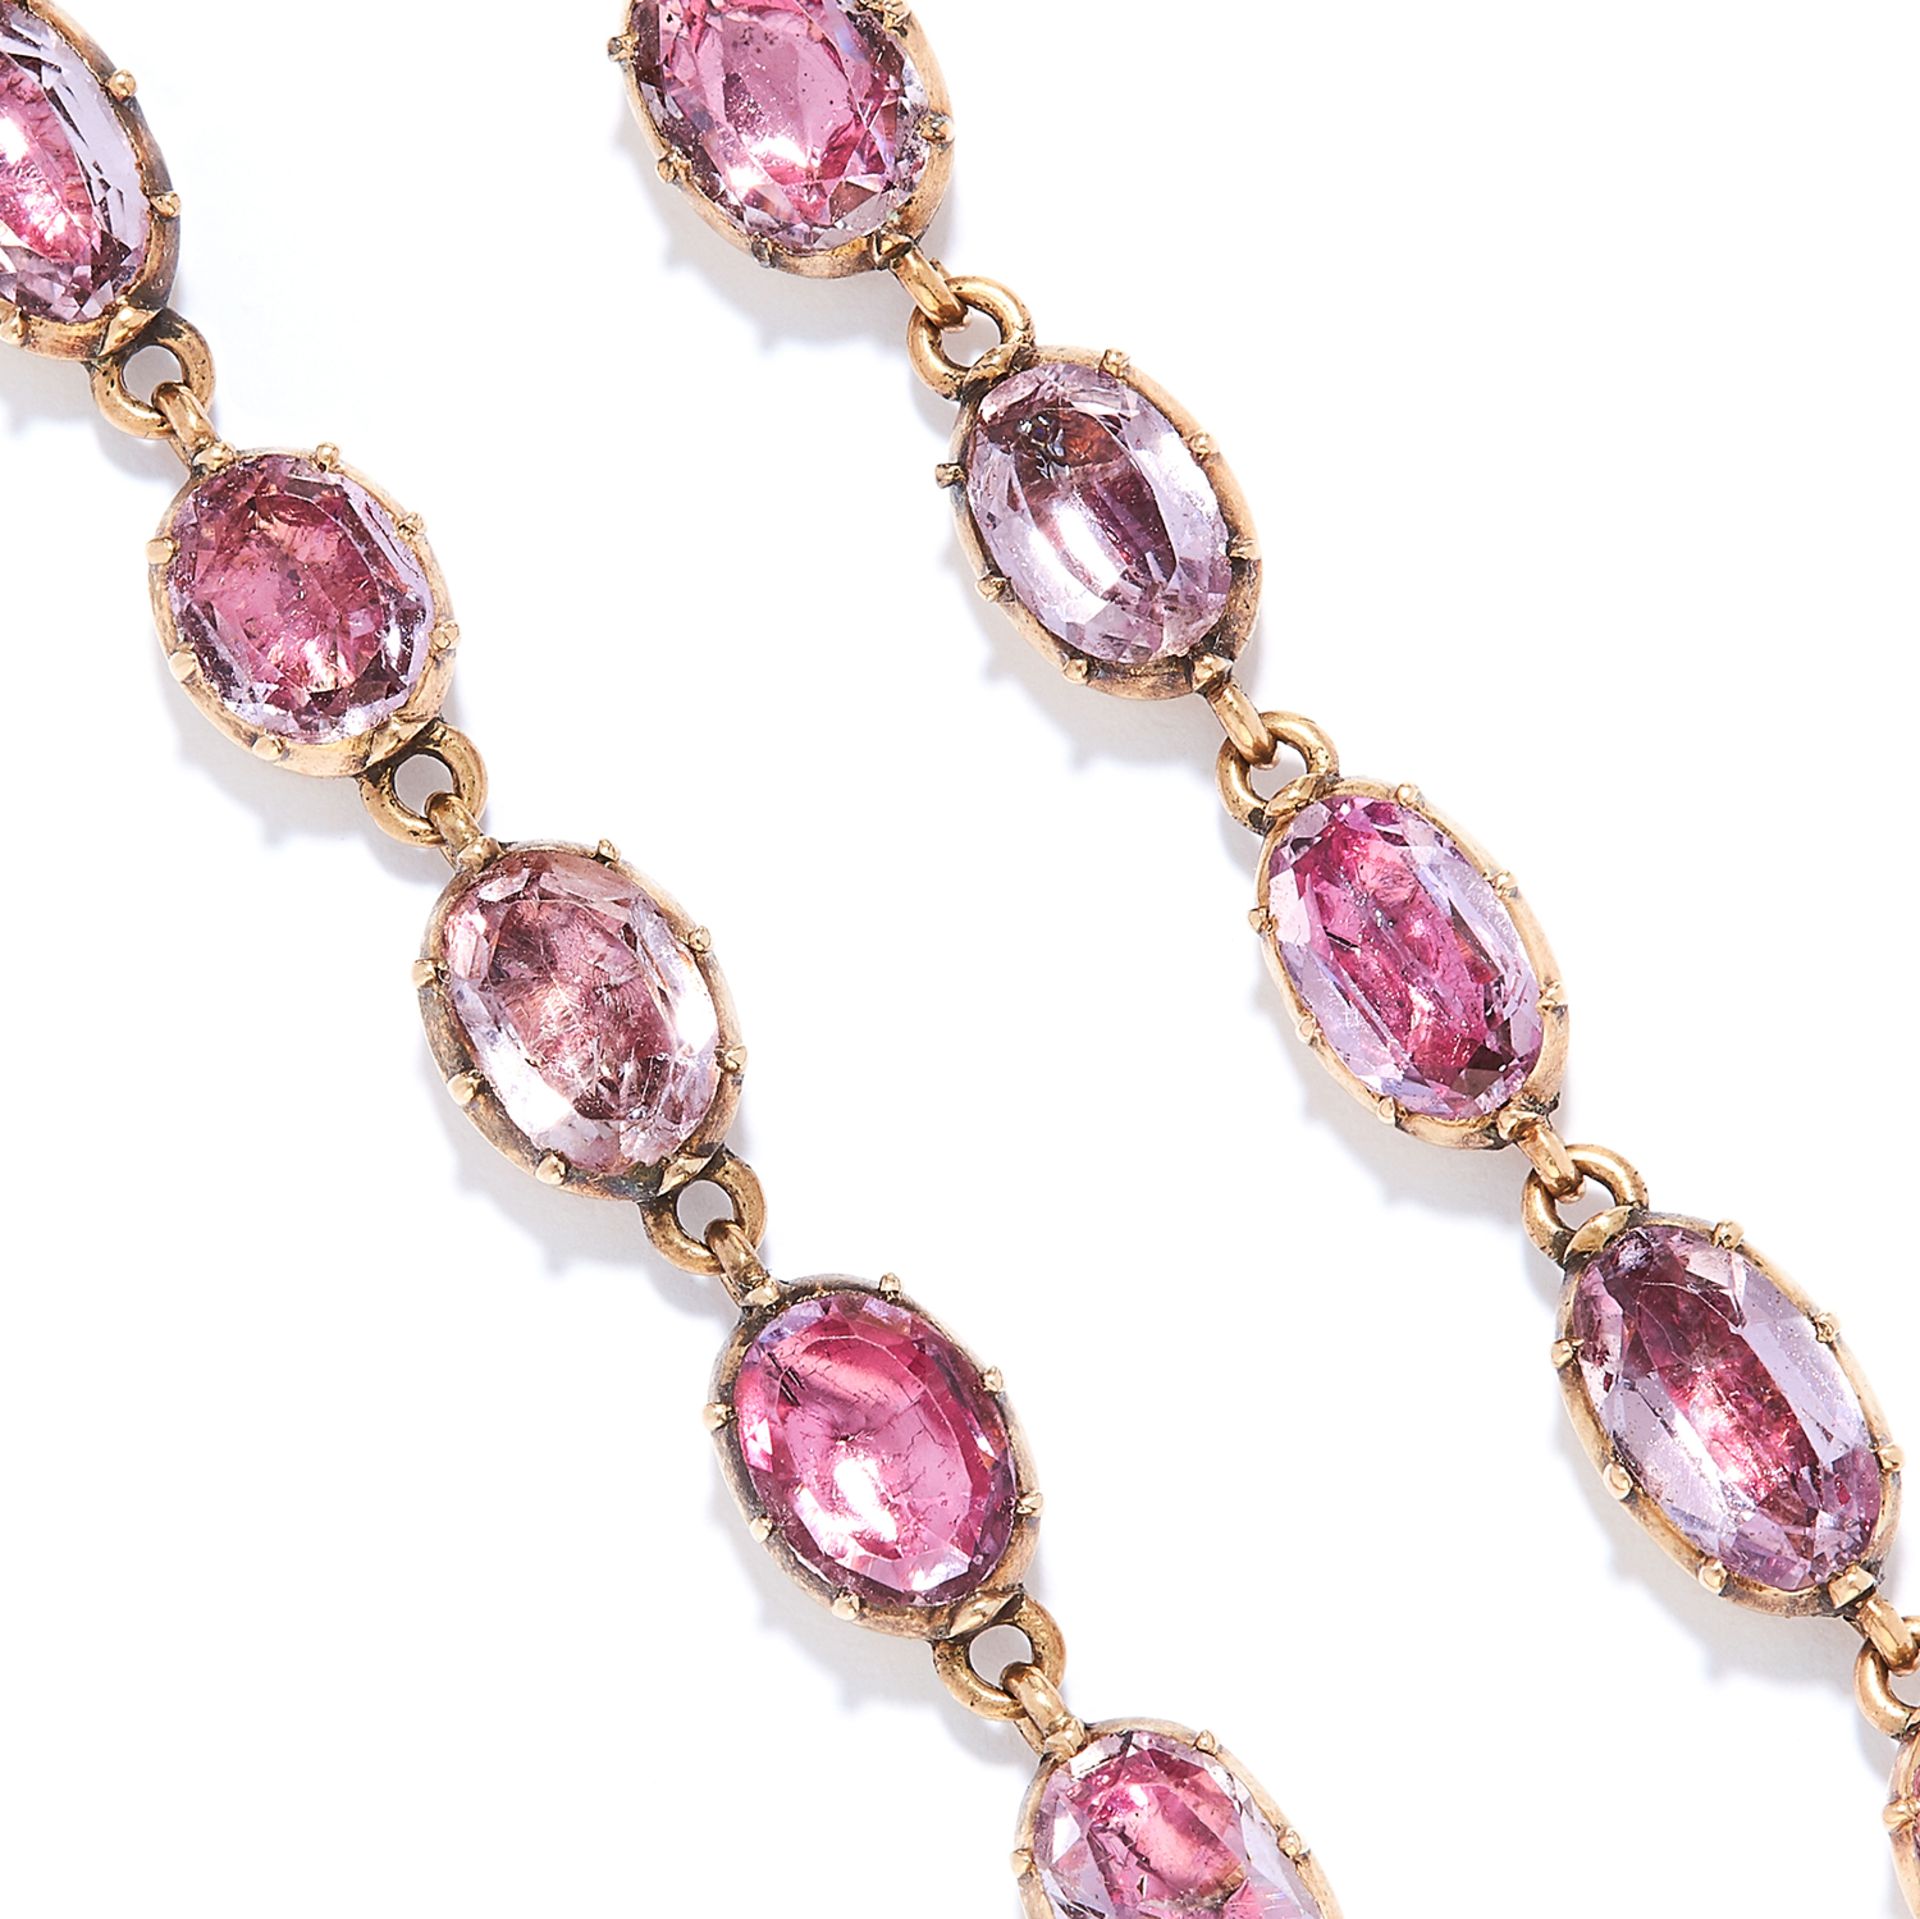 ANTIQUE PINK TOPAZ RIVIERA NECKLACE, EARLY 19TH CENTURY in high carat yellow gold, set with oval cut - Bild 2 aus 2